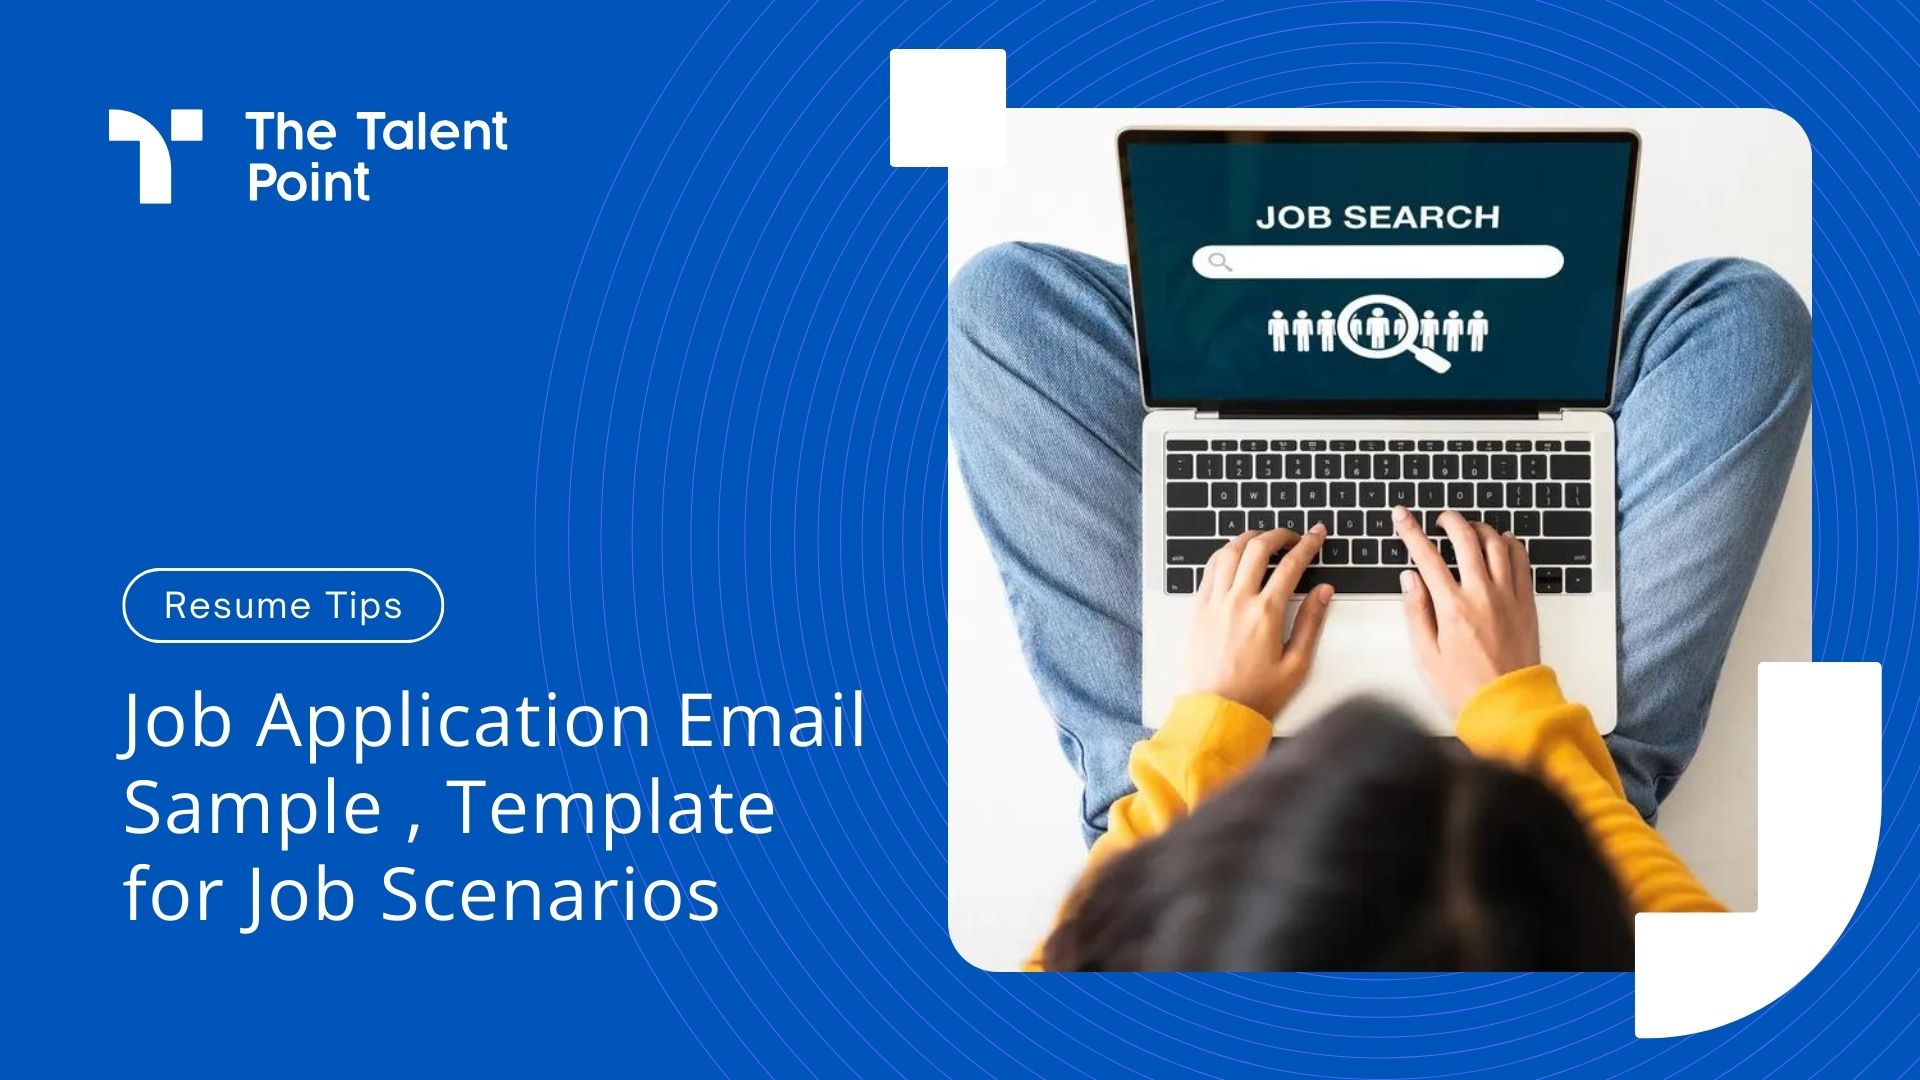 How to Write Email for Job Application - Writing Tips & Free Templates